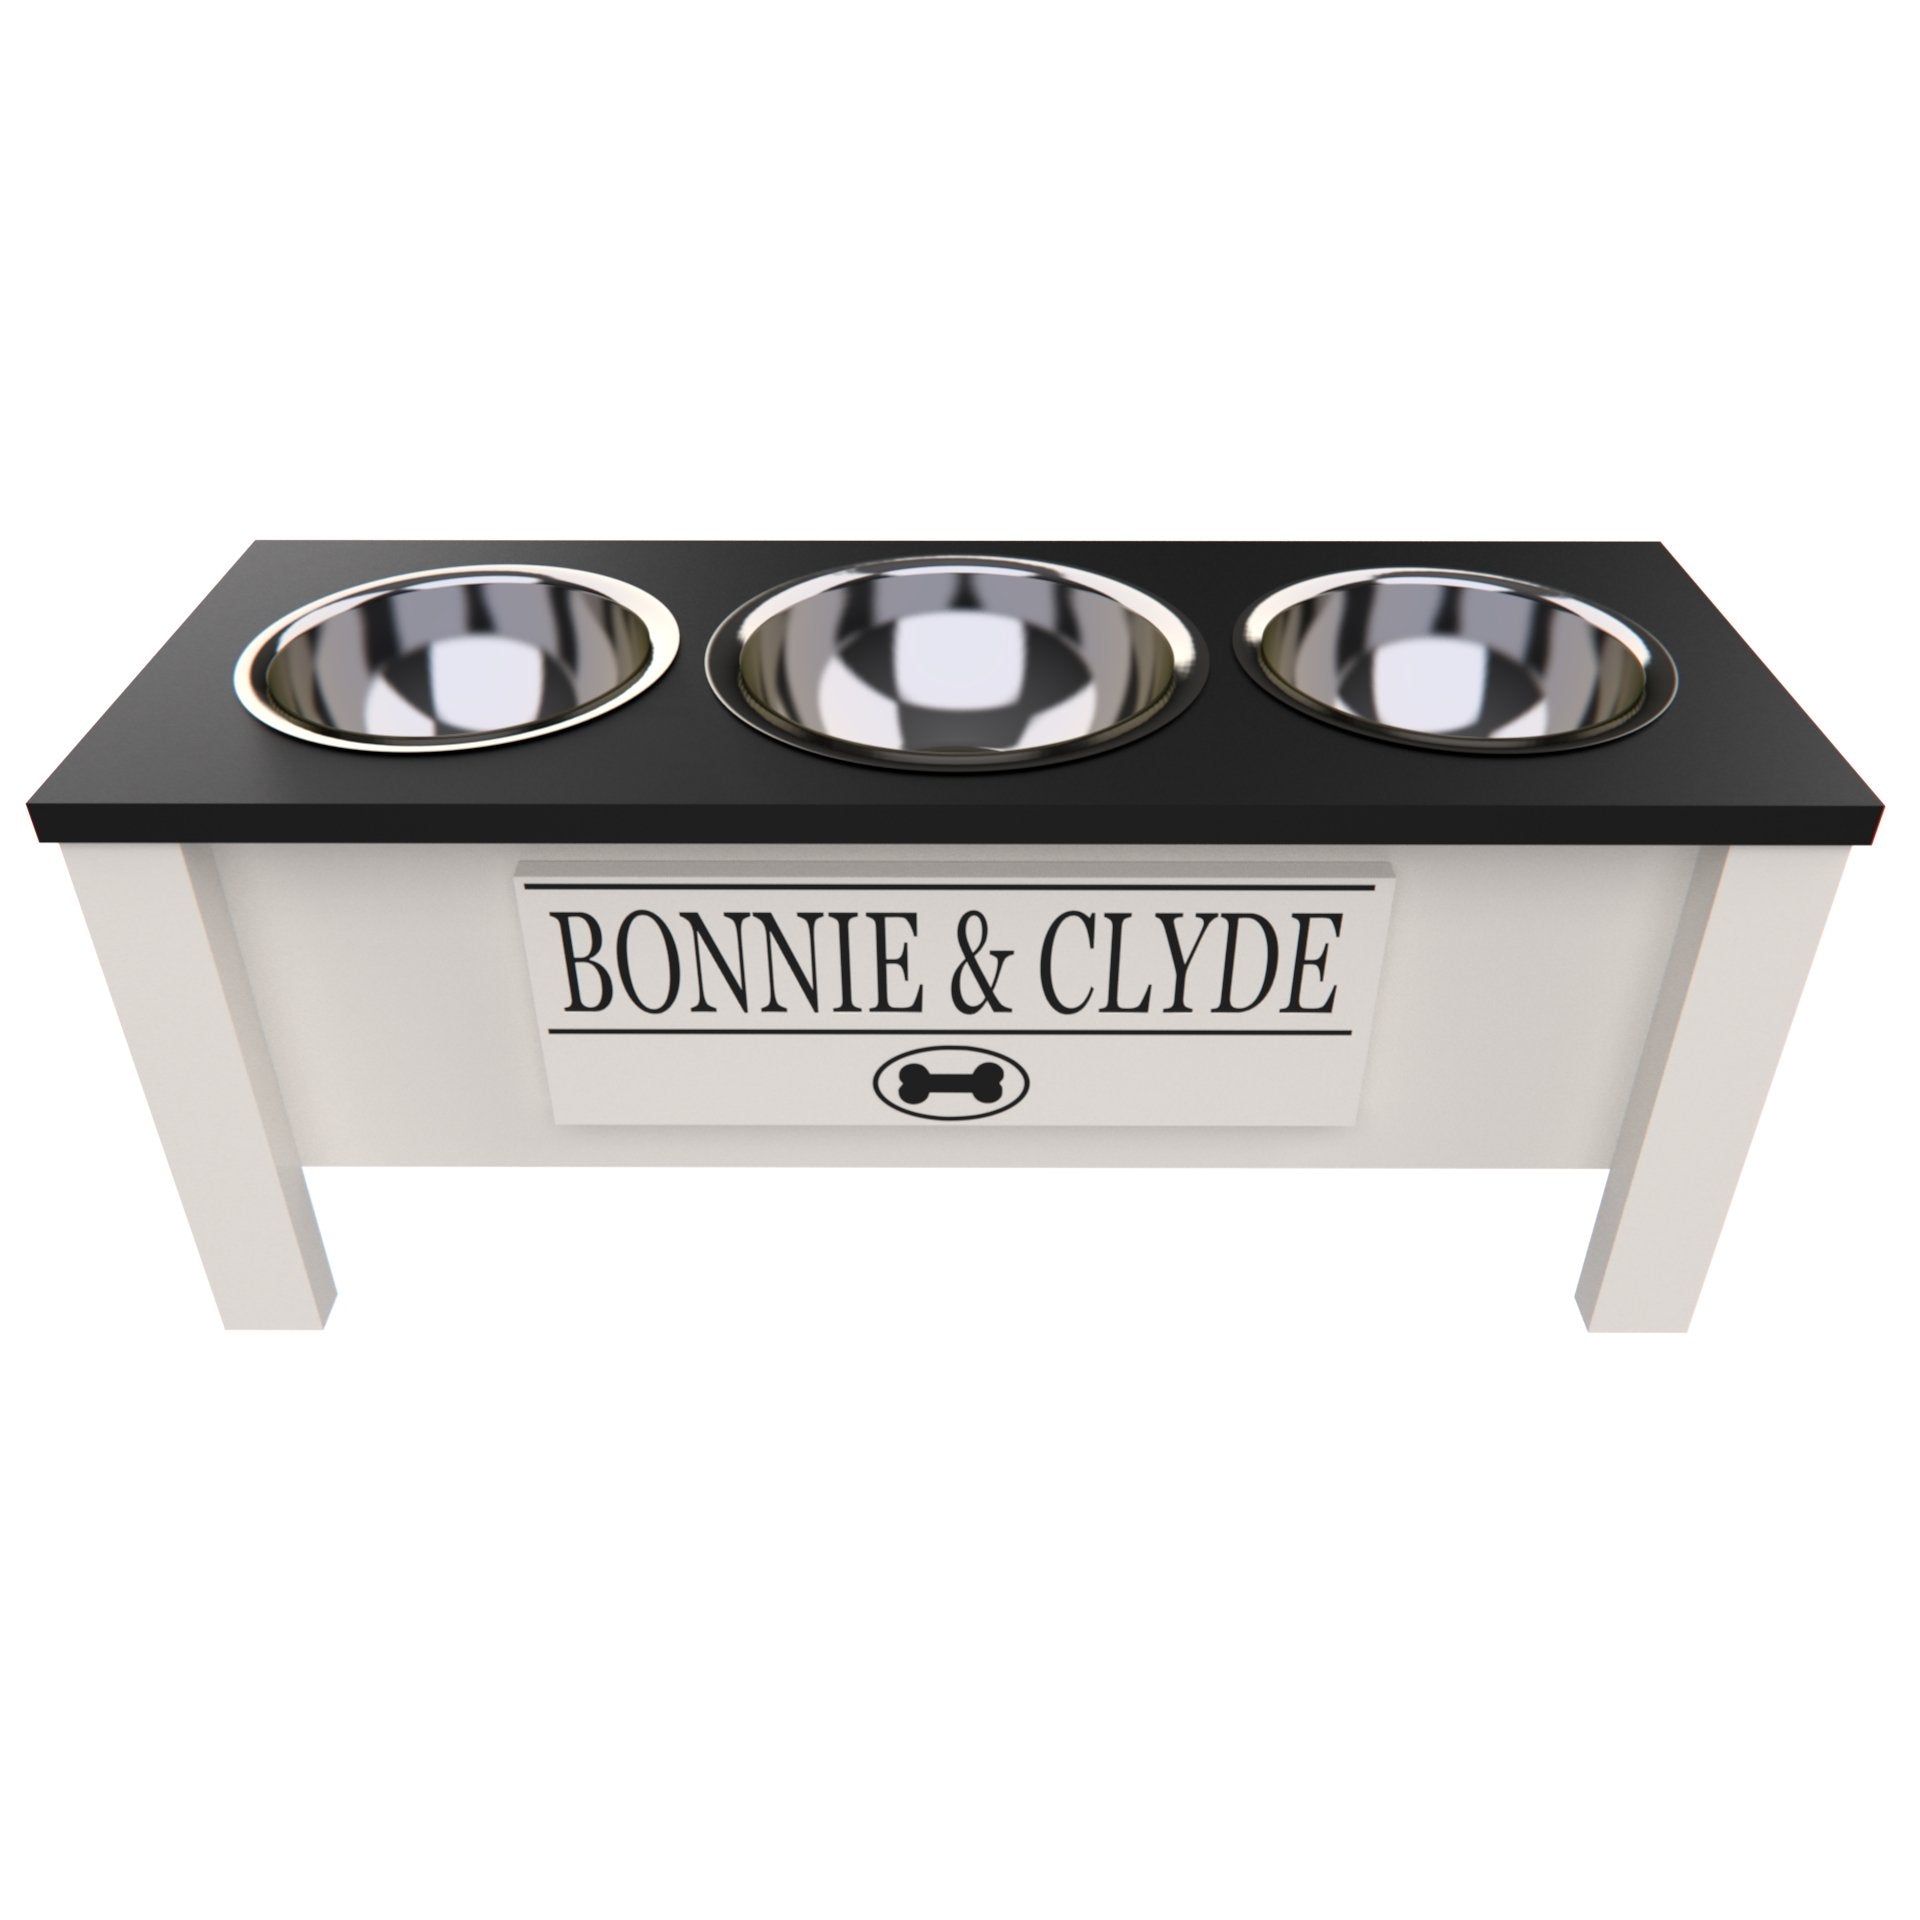 Personalized Elevated Feeder for Large Dogs, Custom Dog Bowl, Pet